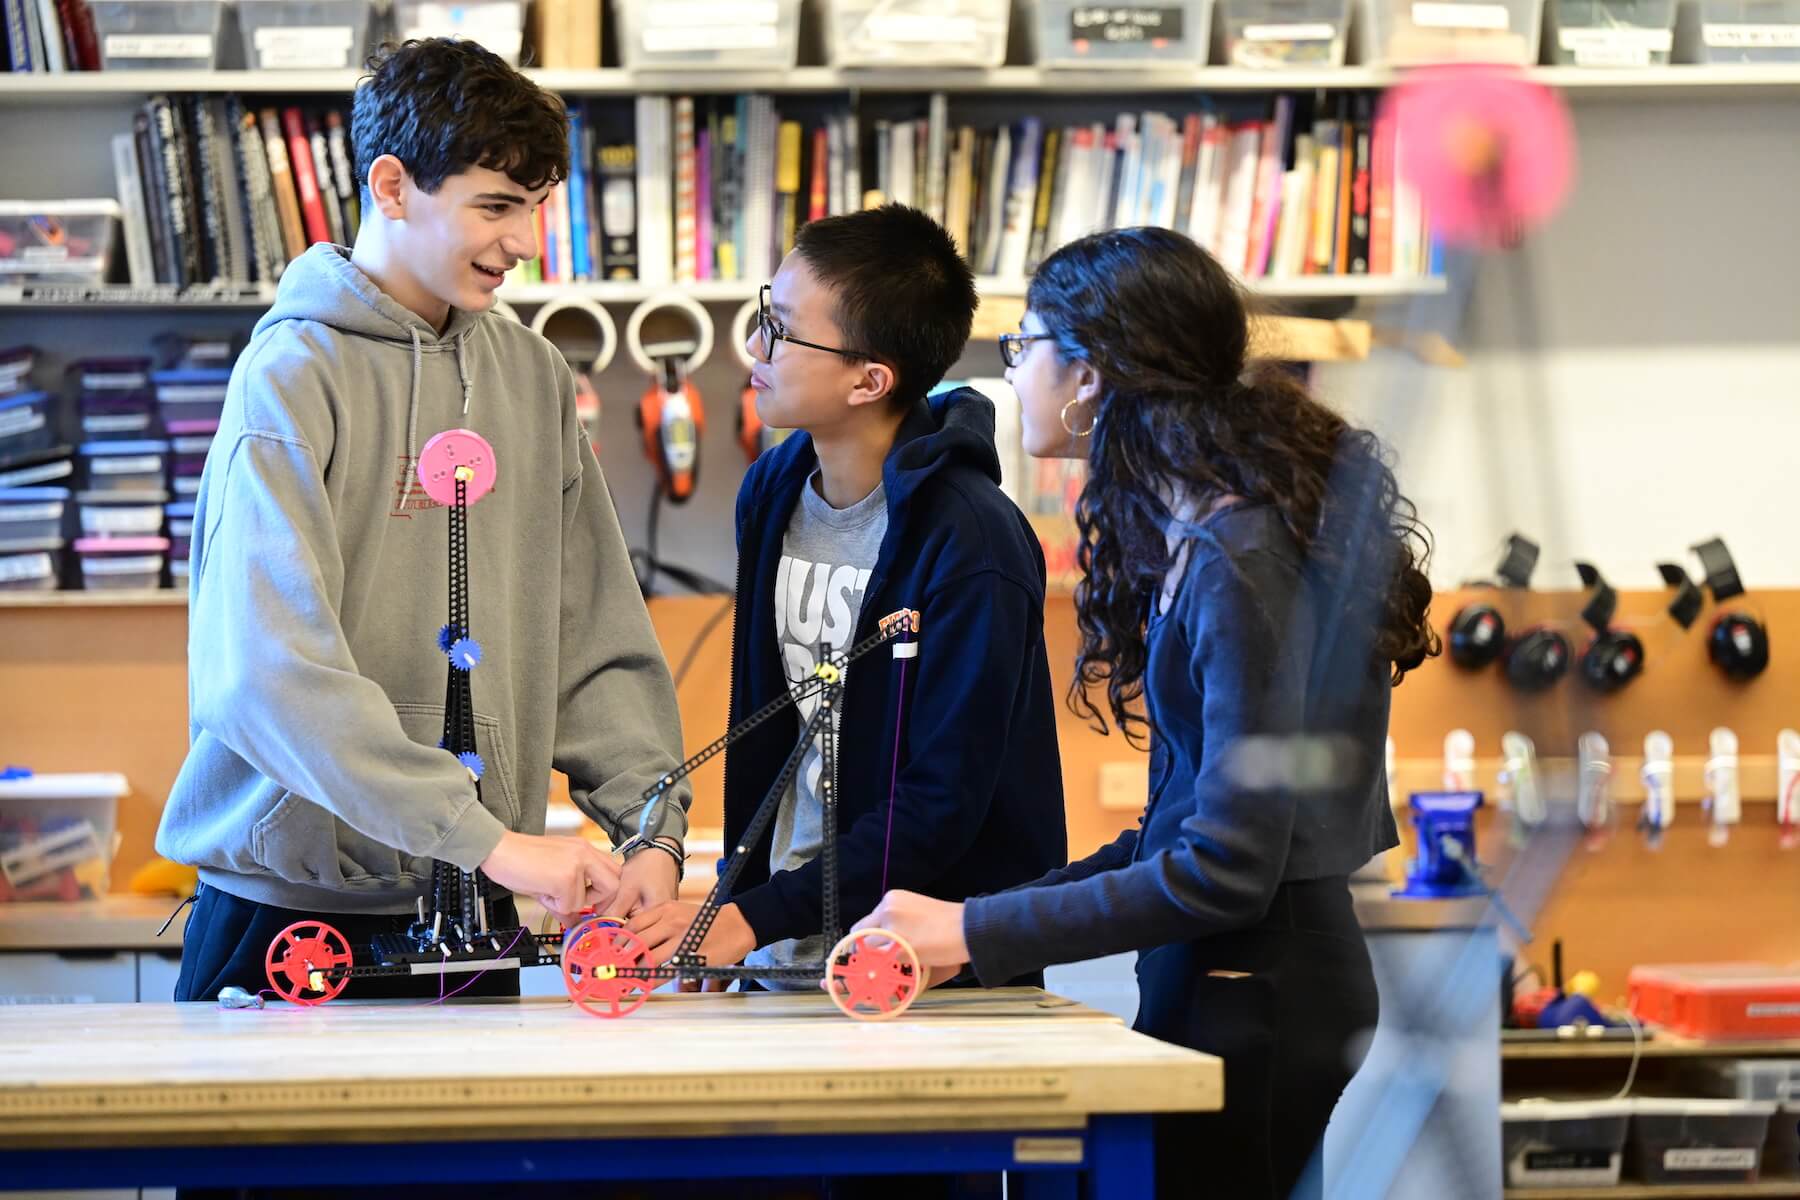 Ethical Culture Fieldston School students building in engineering class